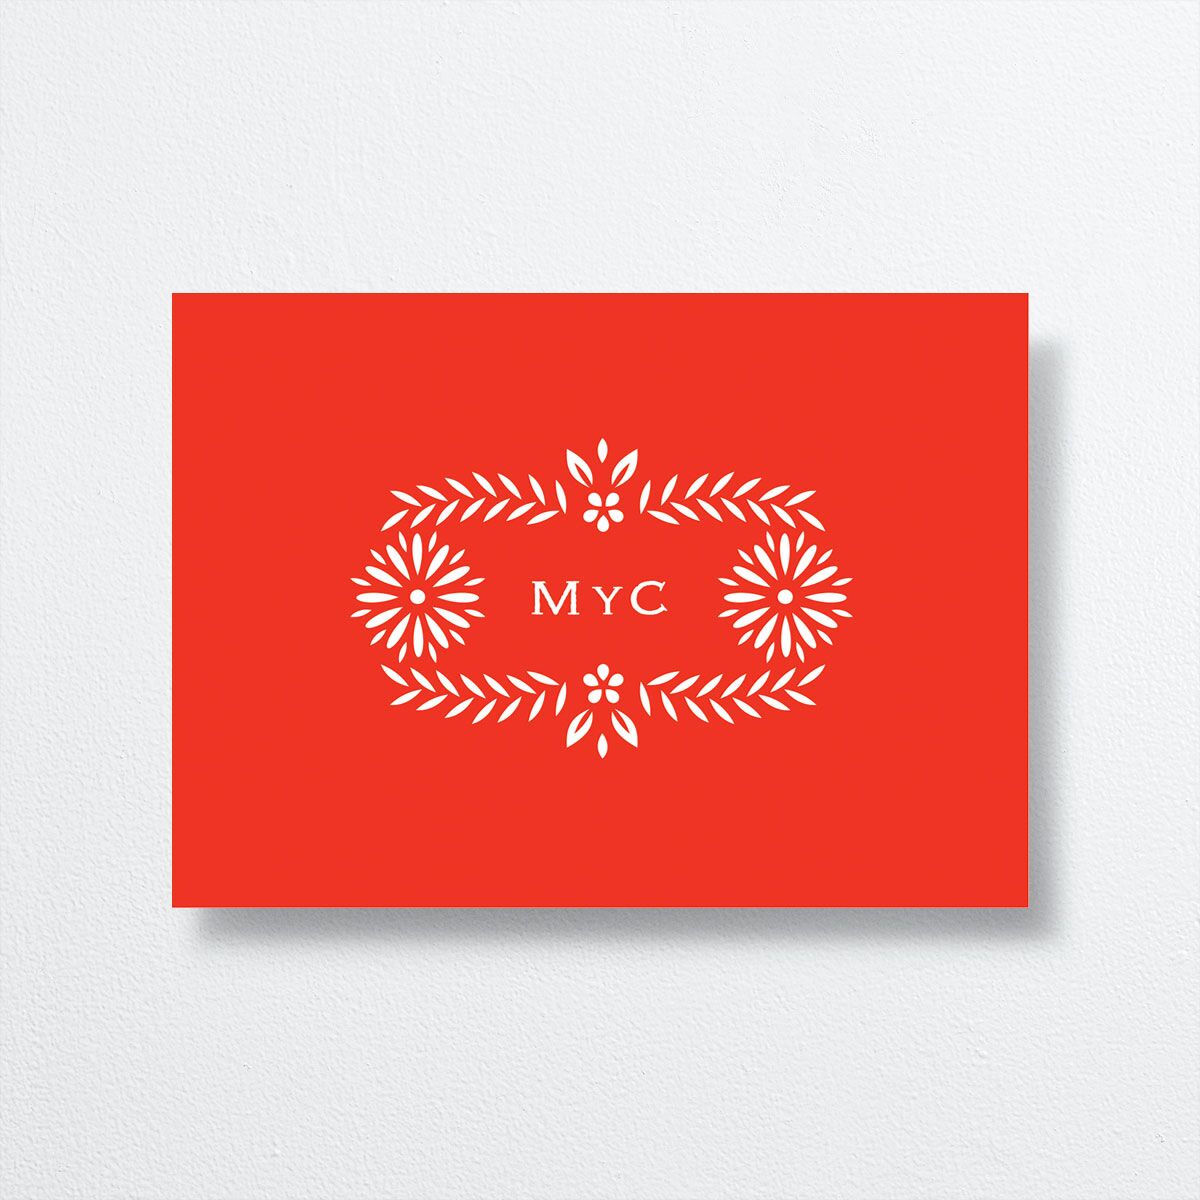 Papel Picado Wedding Response Cards back in red